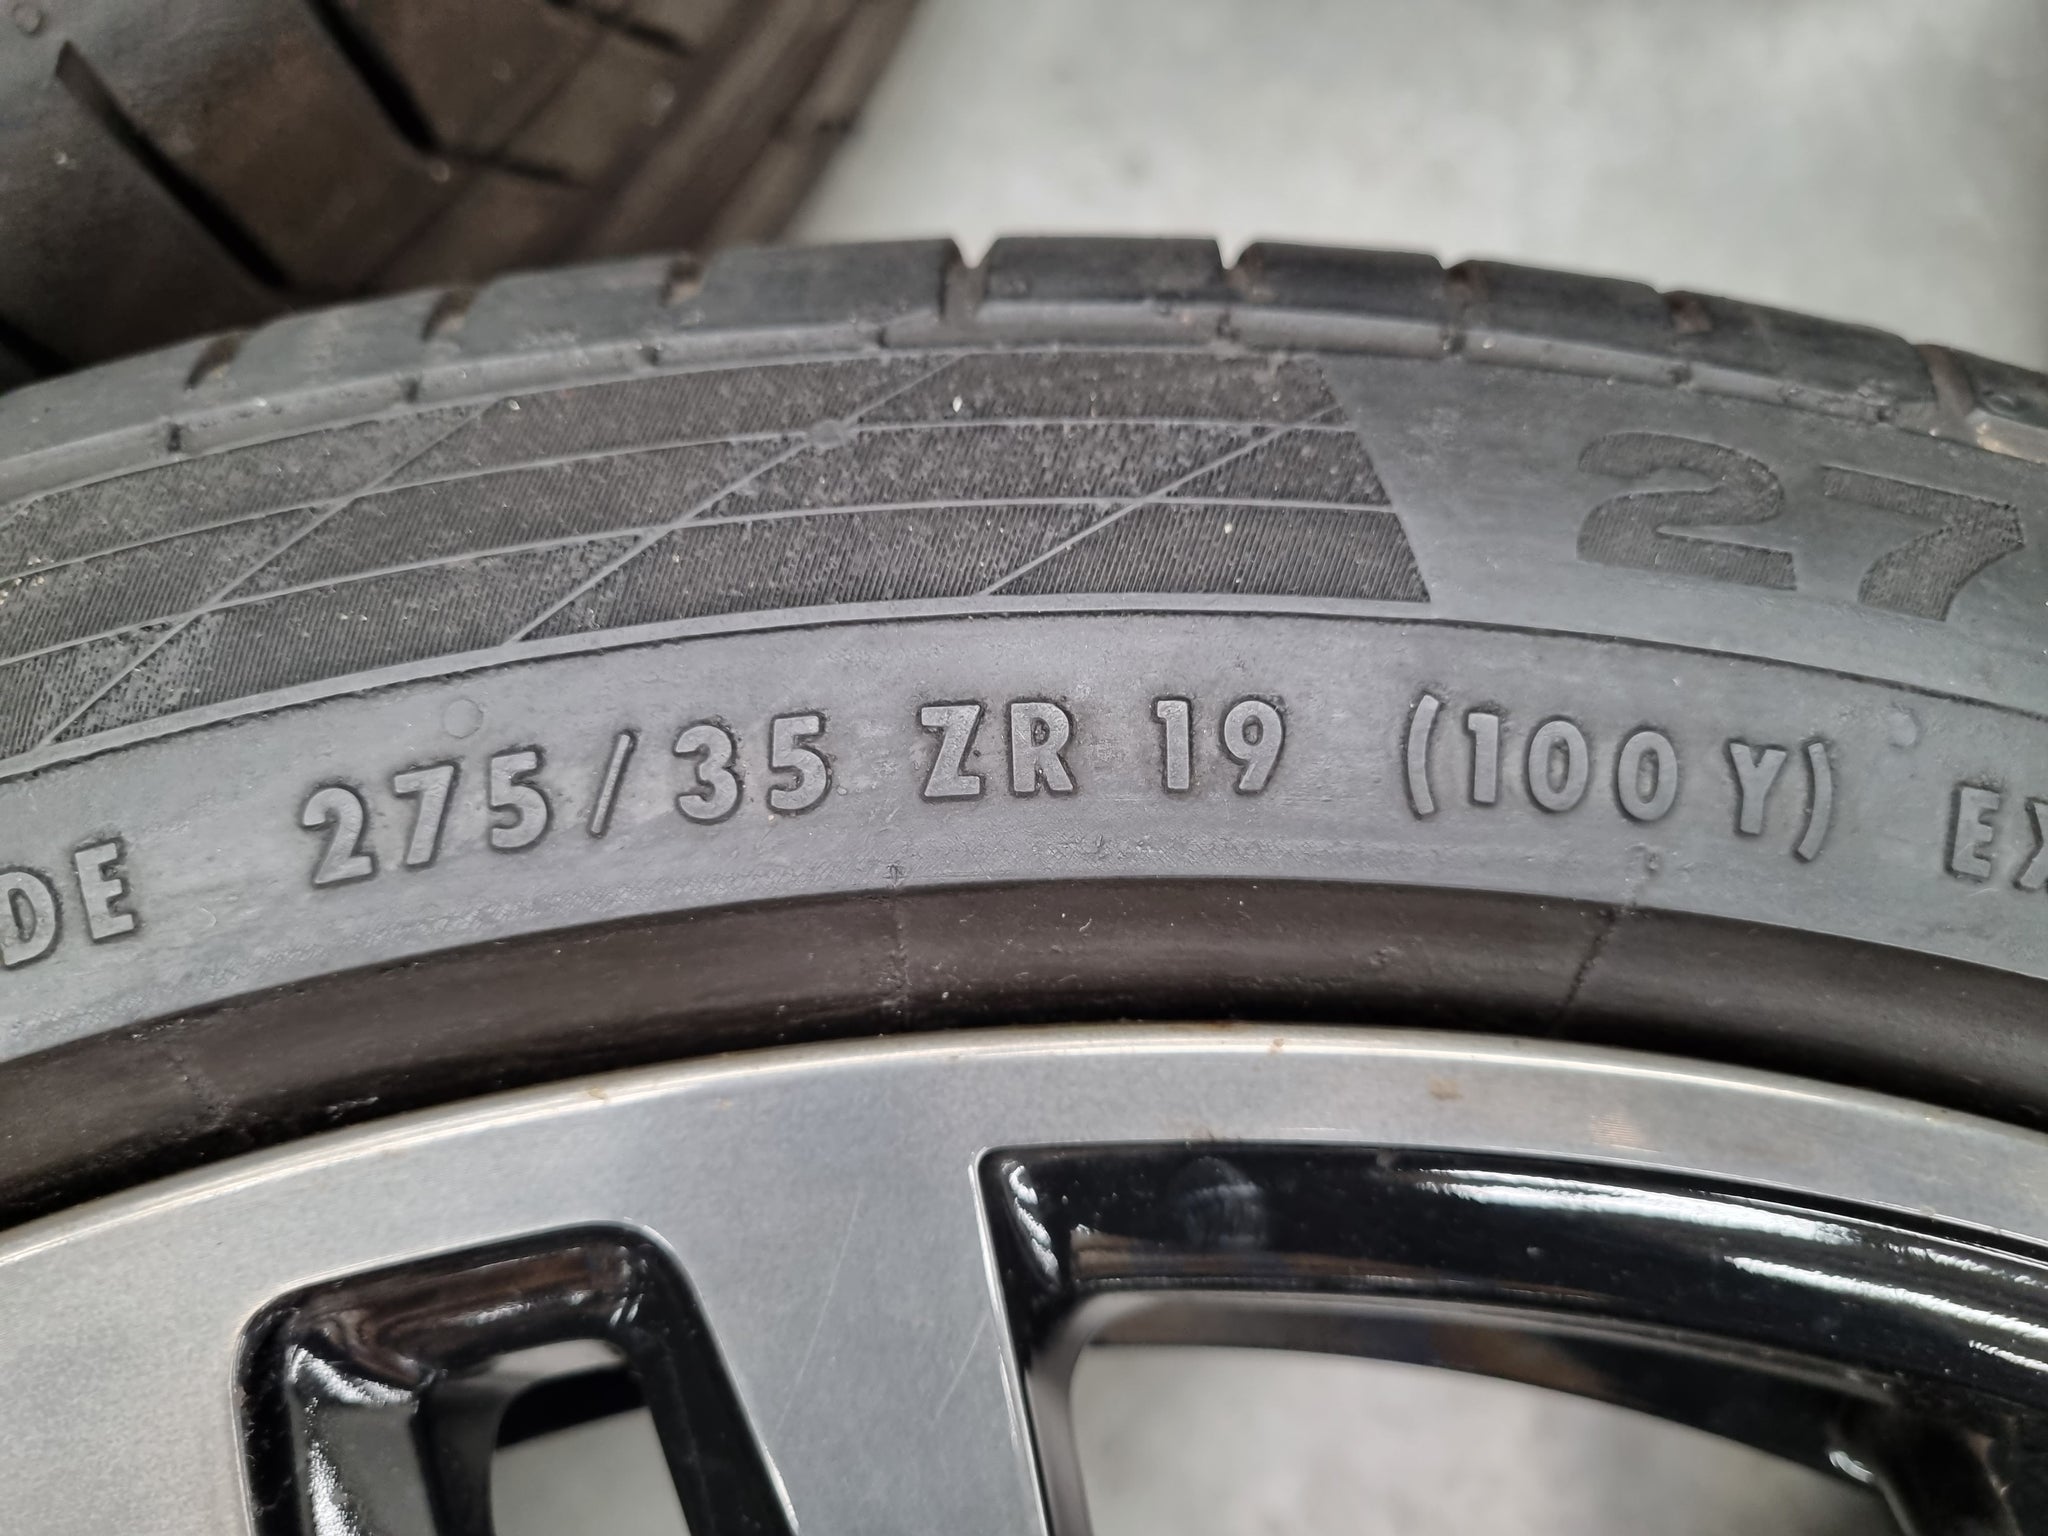 Load image into Gallery viewer, Genuine BMW M3 M4 F80 F82 Style 437M 19 Inch Wheels and Tyres Set of 4
